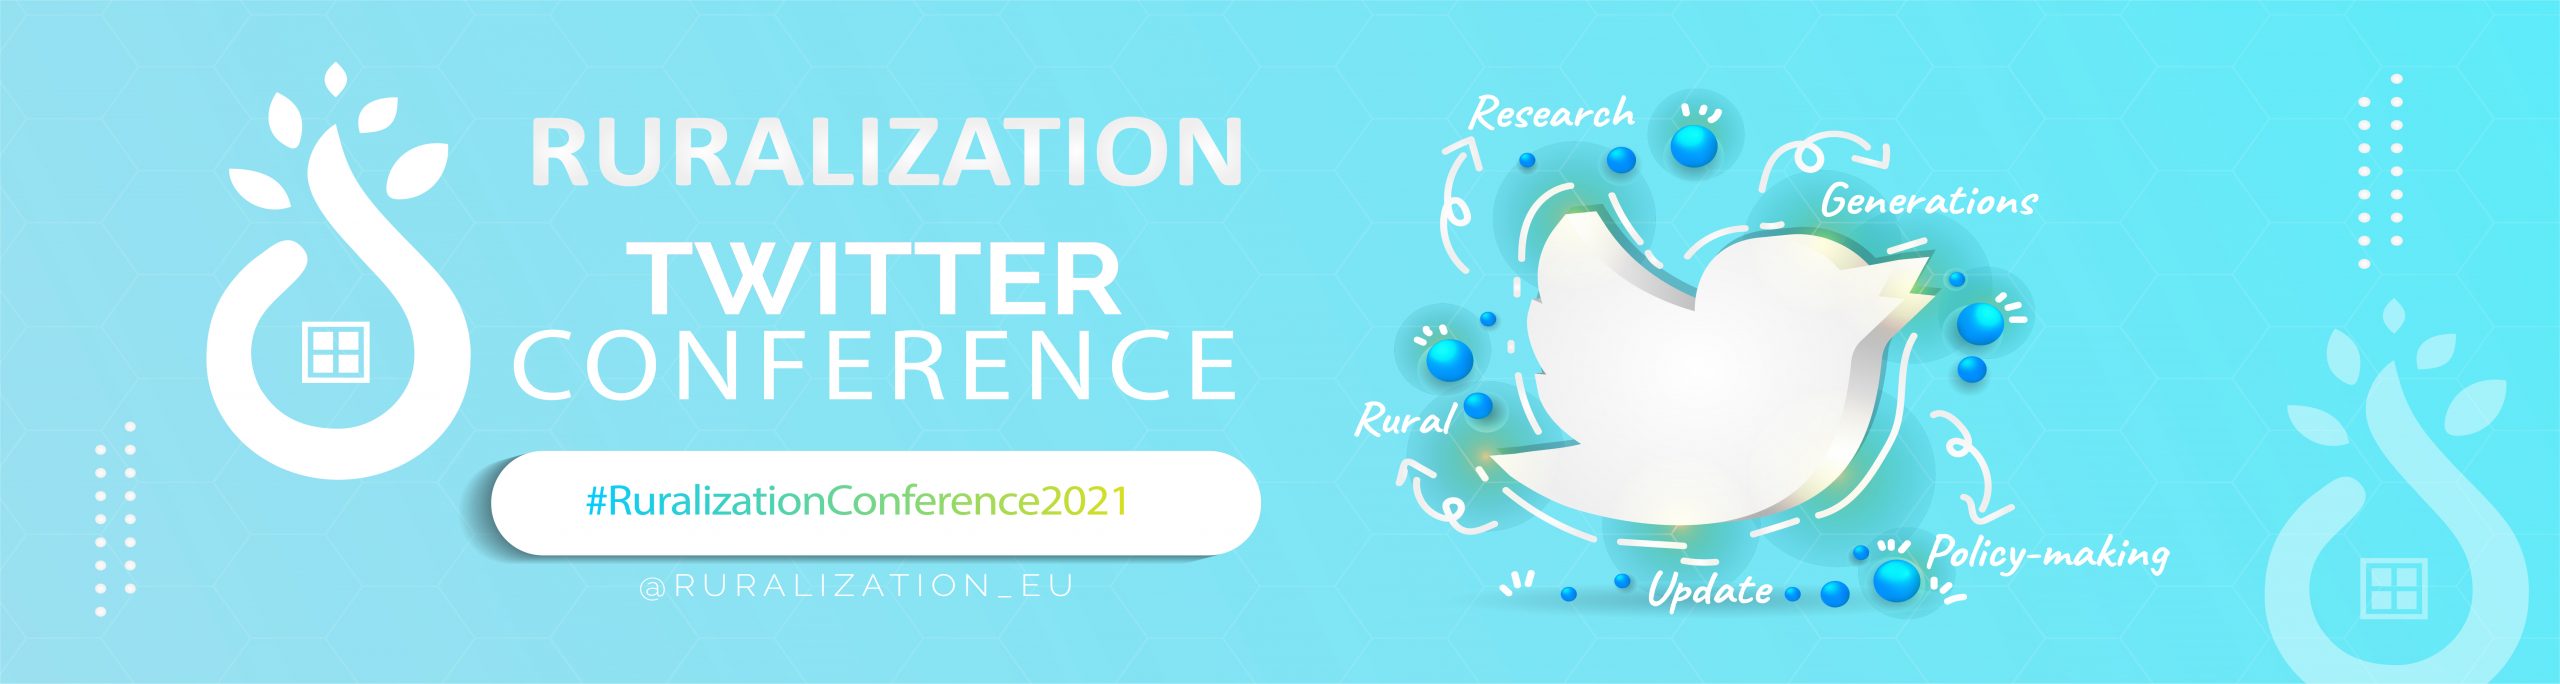 Twitter_conference_banner_white_soft